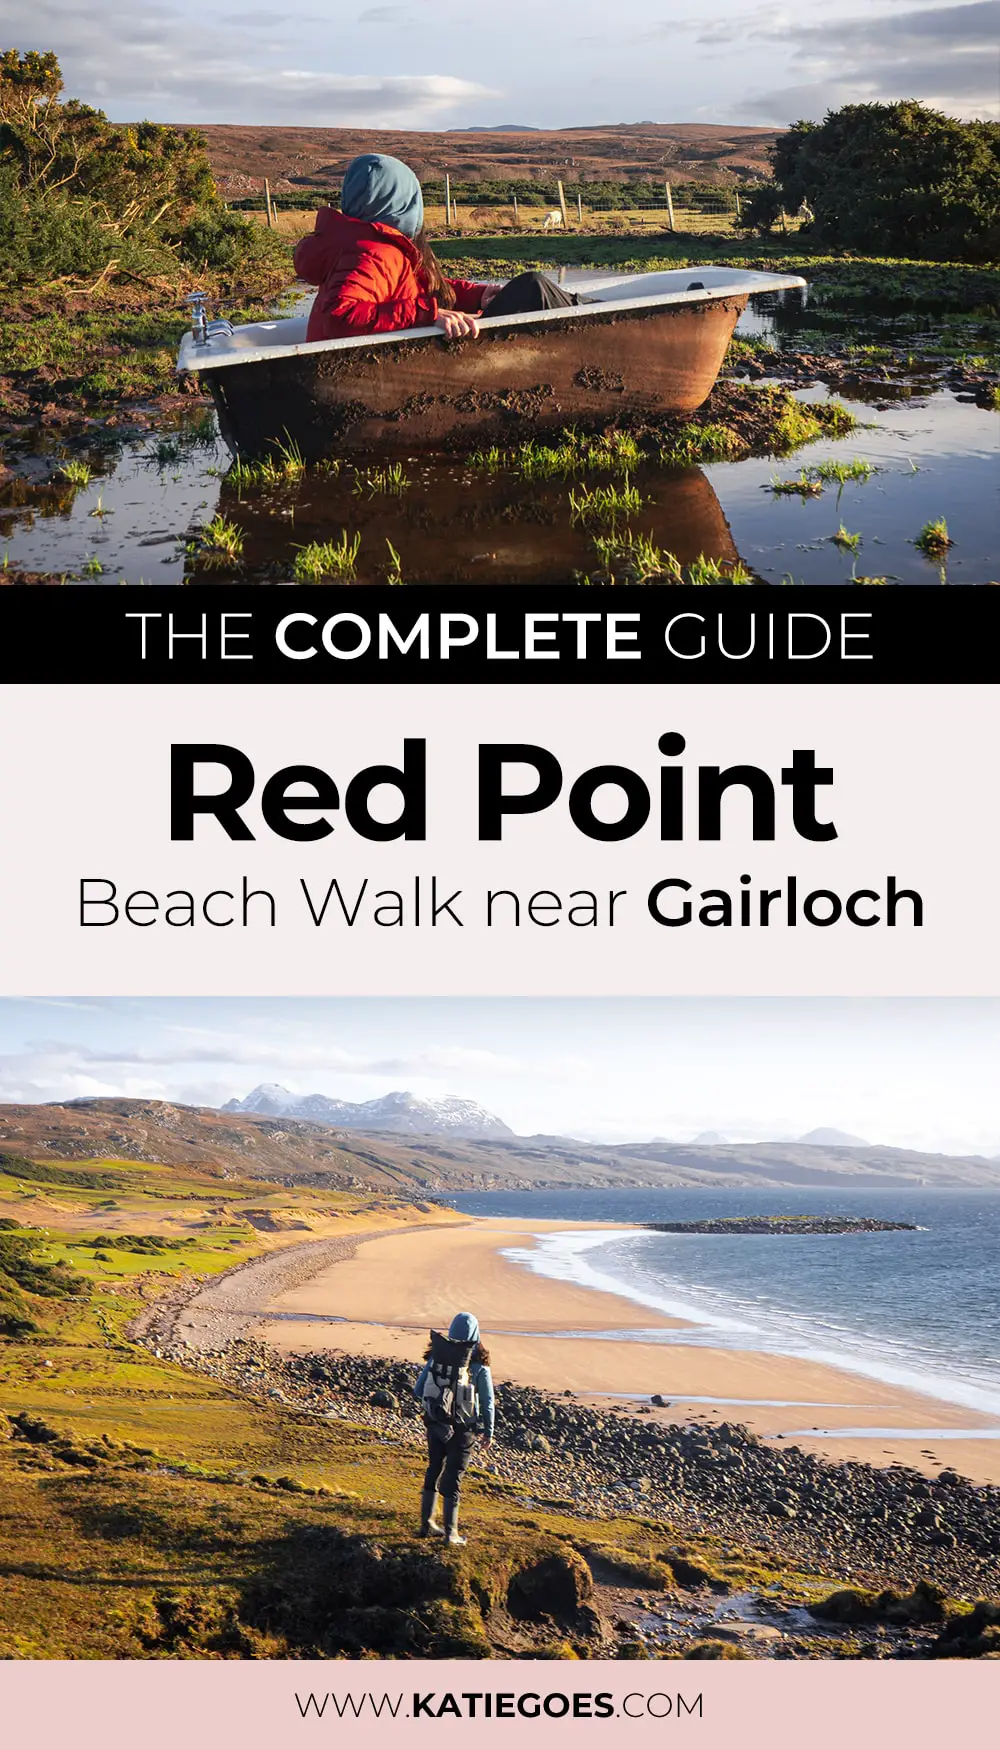 The Complete Guide: Red Point Beach Walk near Gairloch